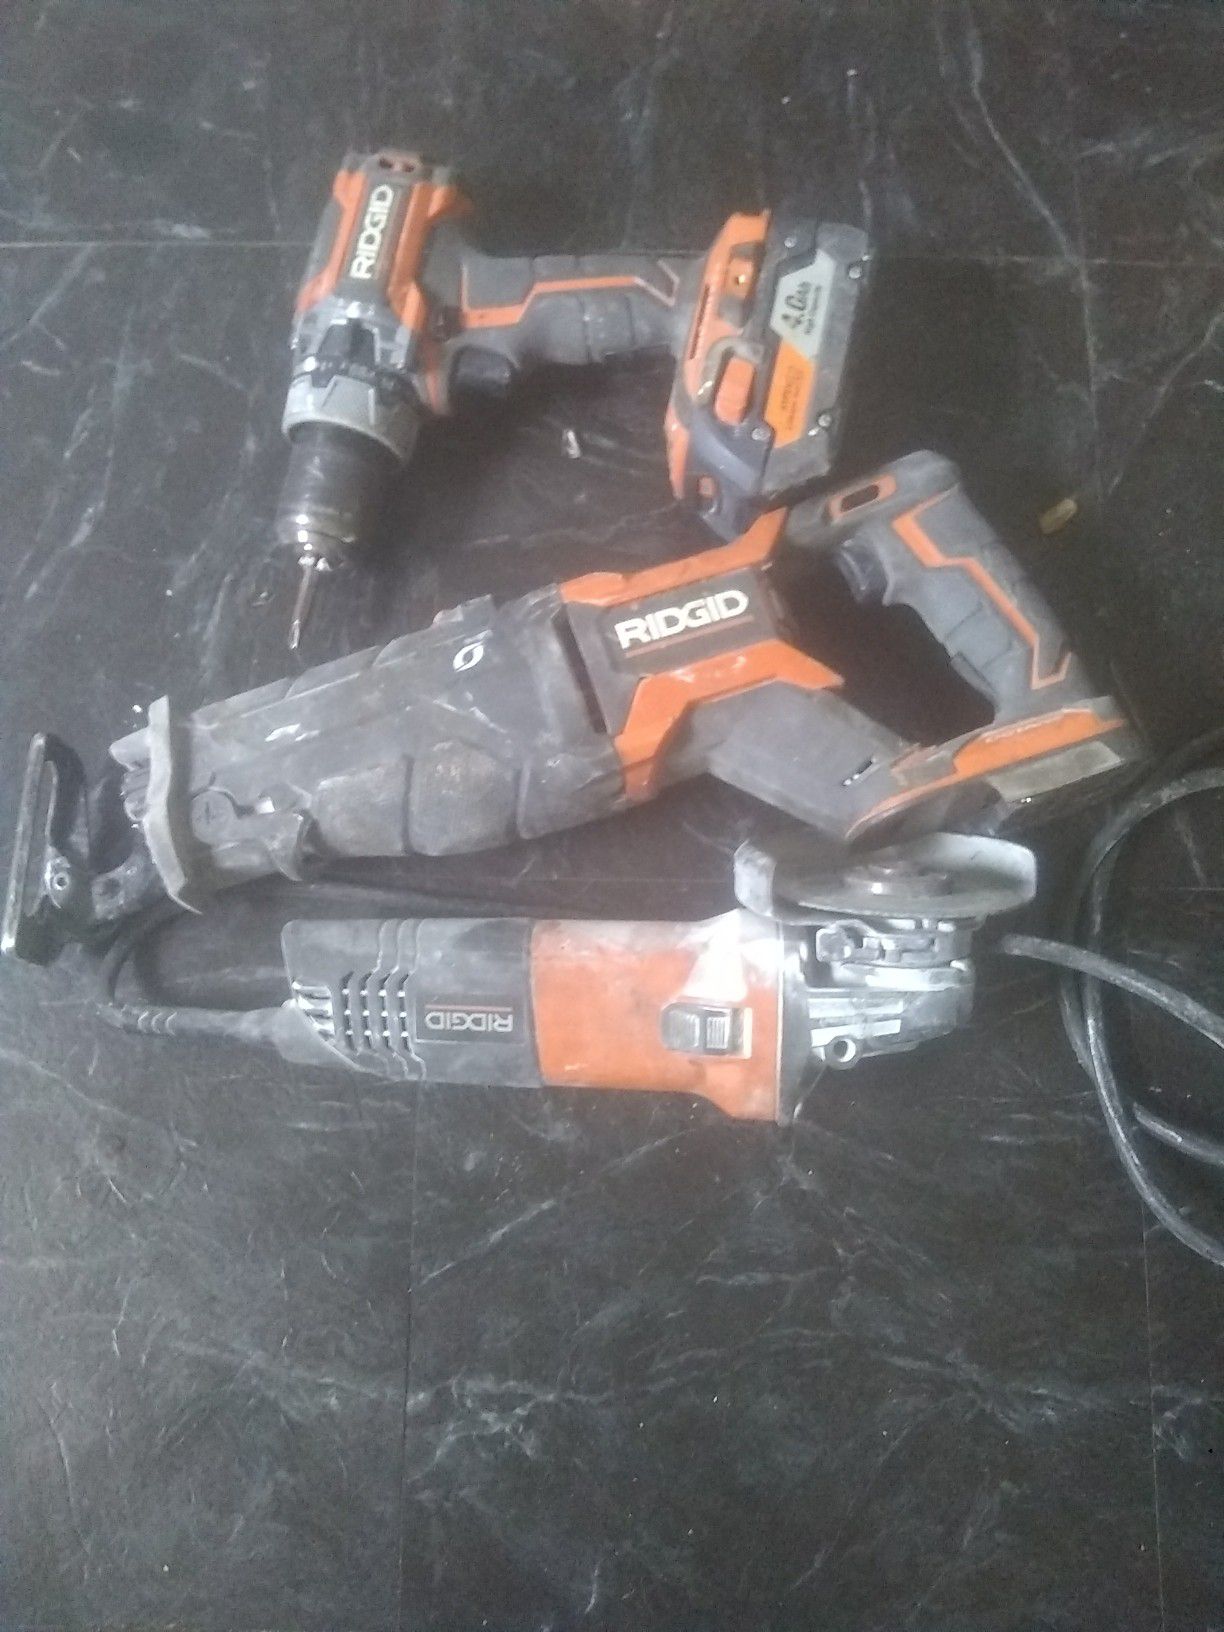 Battery pack drill and saw plus grinder